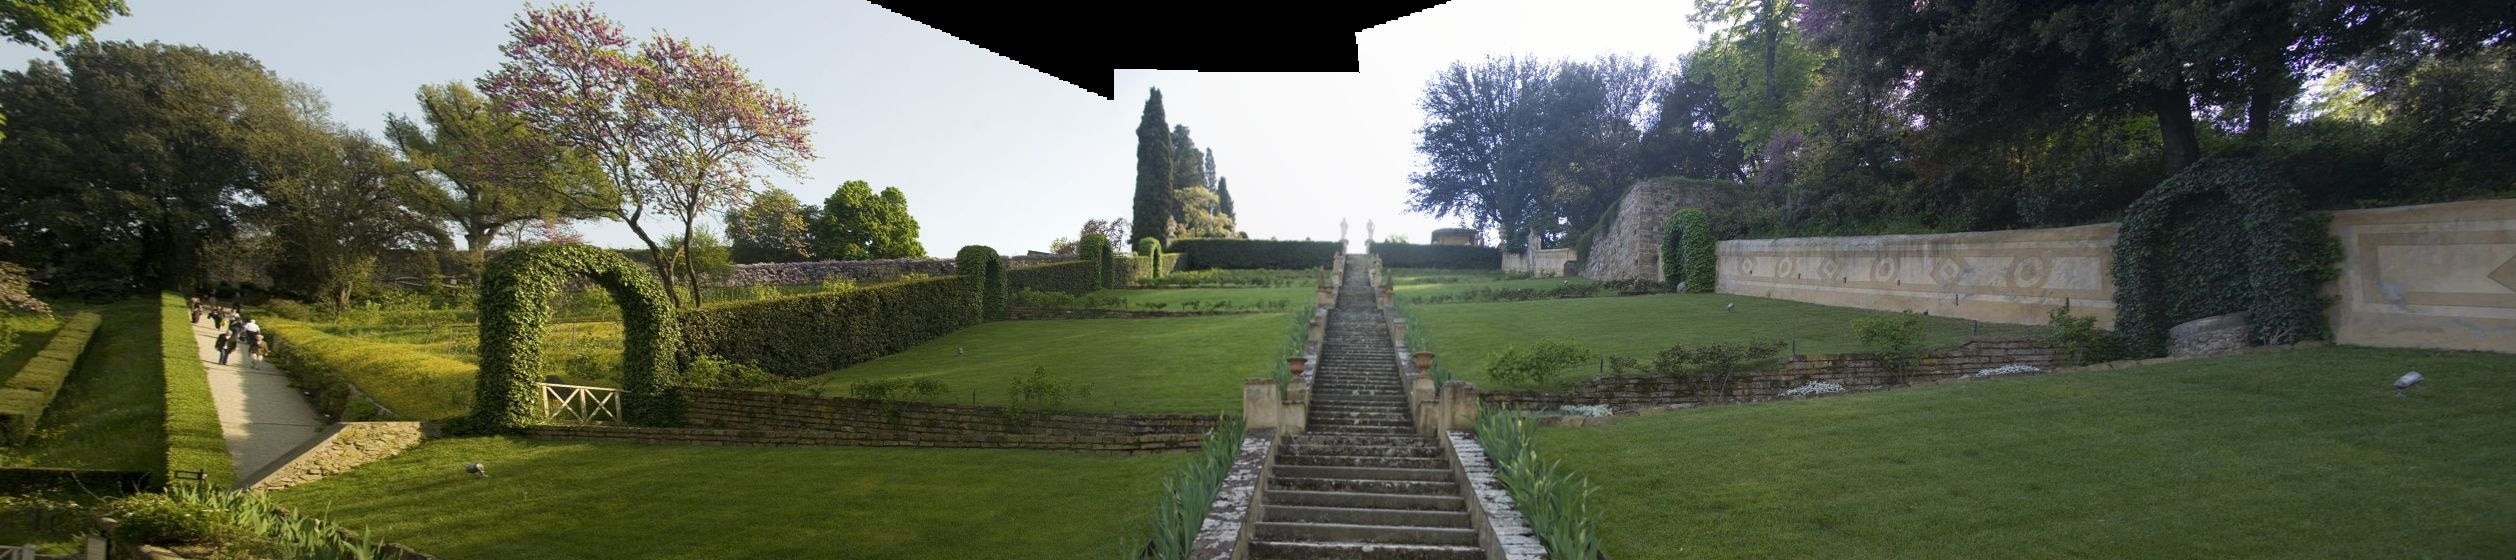 Firenze / Florence - Giardino Bardini - ICE Photocompilation Viewing from ESE to WSW